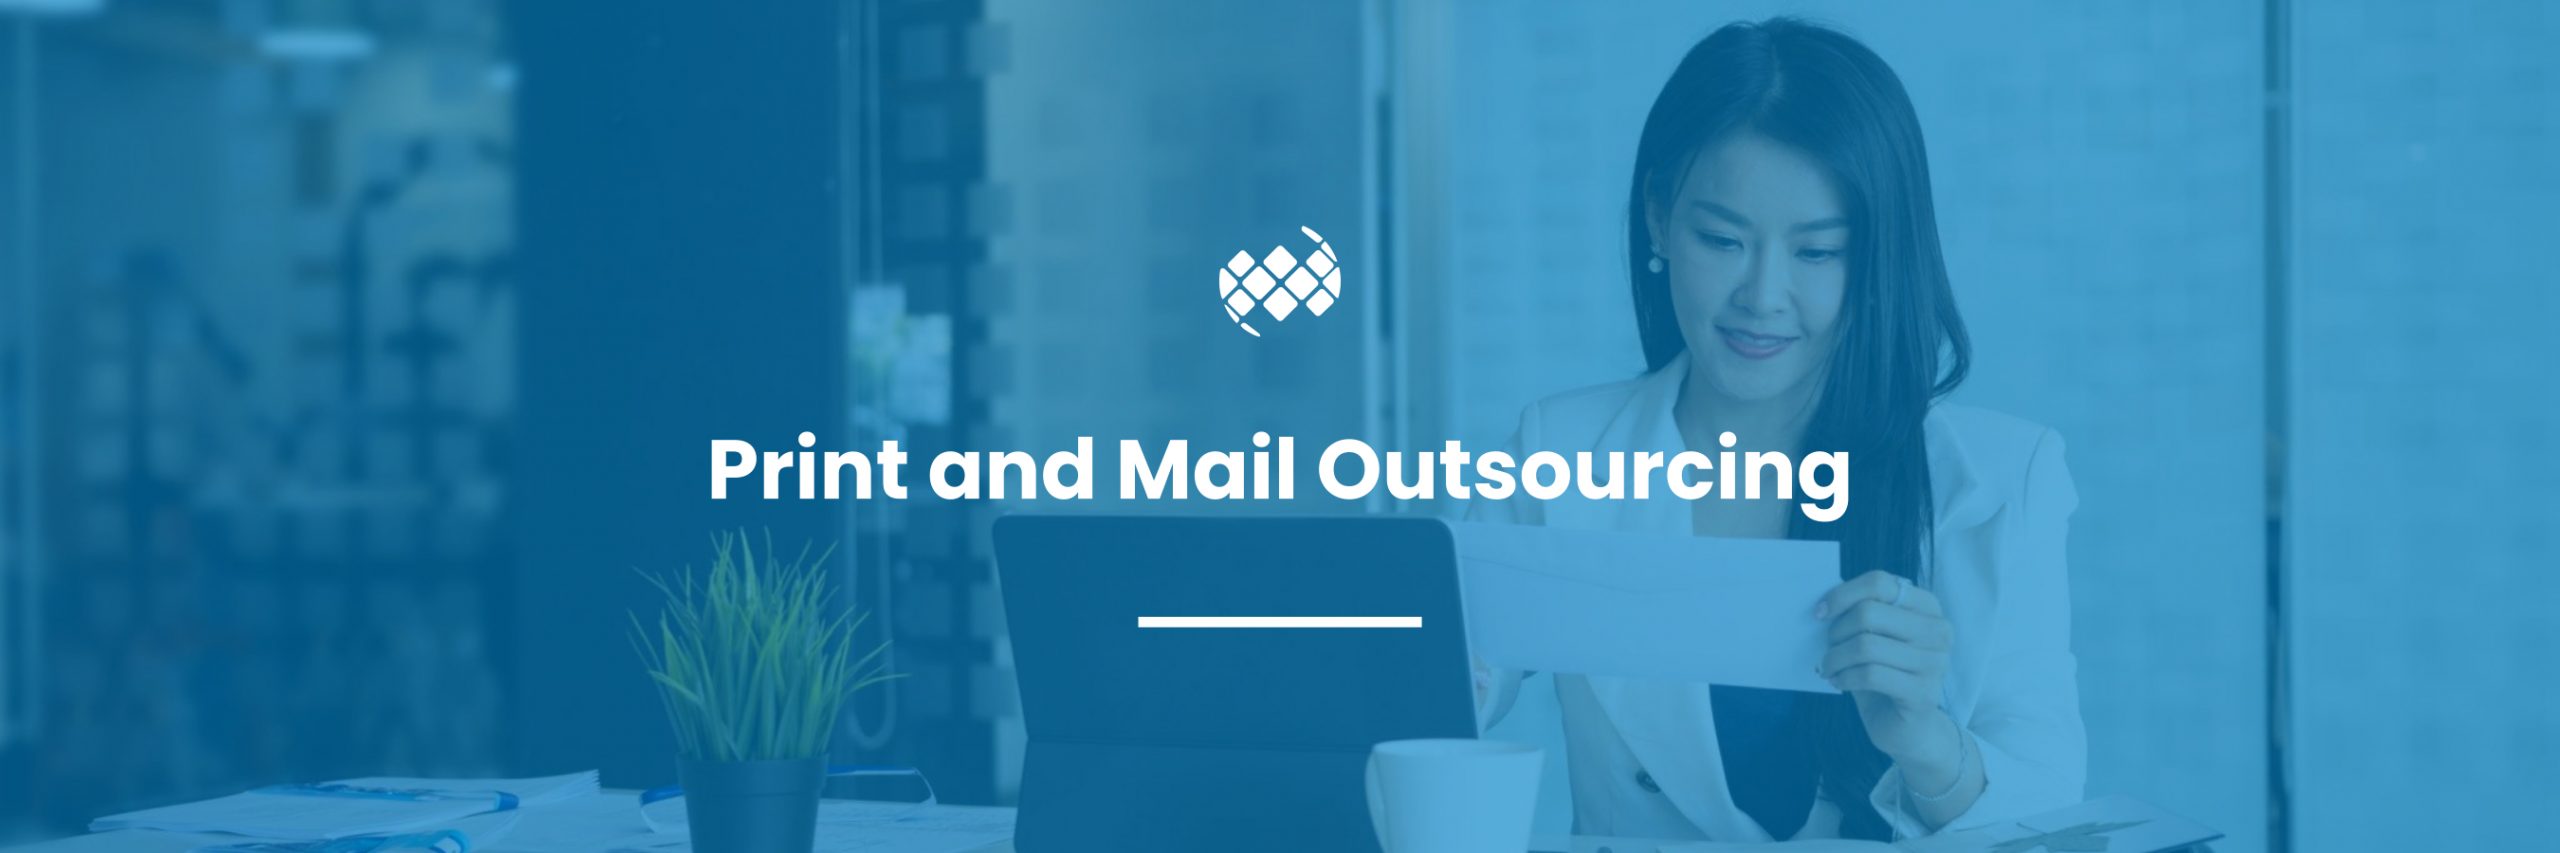 Print and Mail Outsourcing service